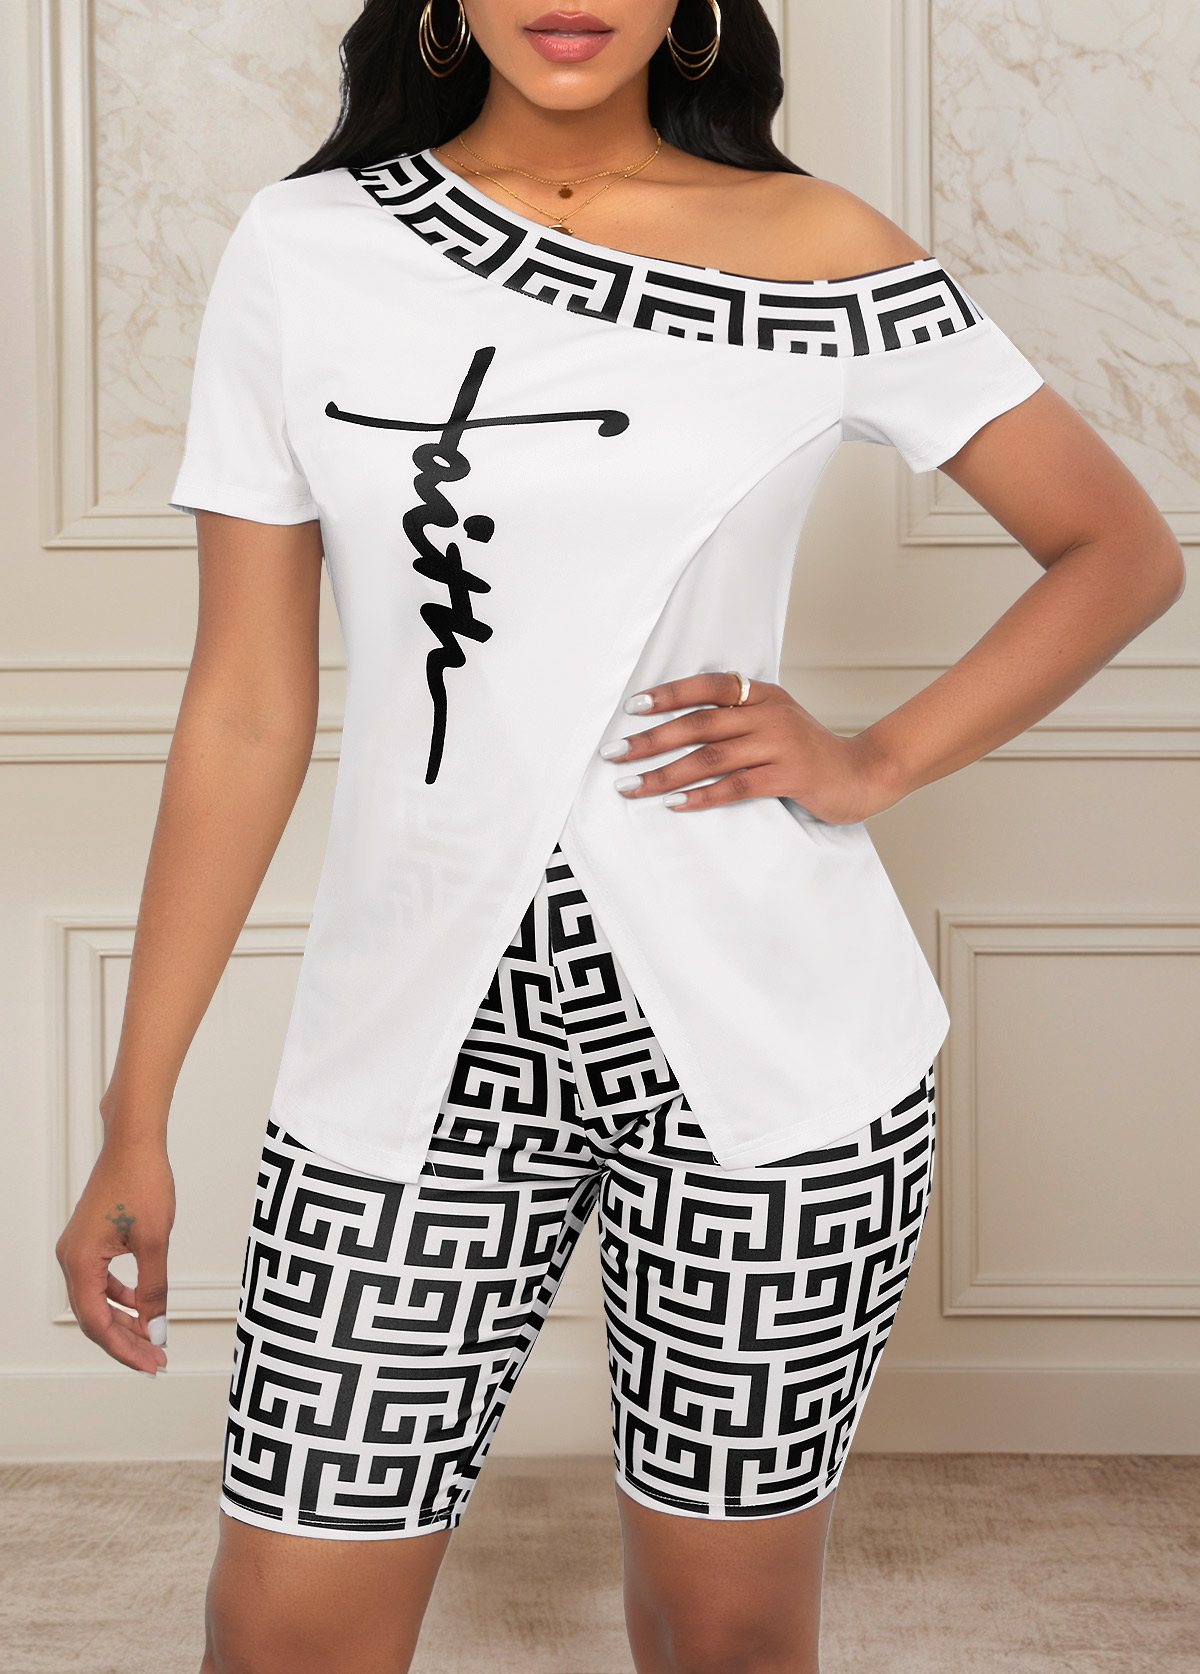 Geometric Print Patchwork White Short Skinny Top and Shorts